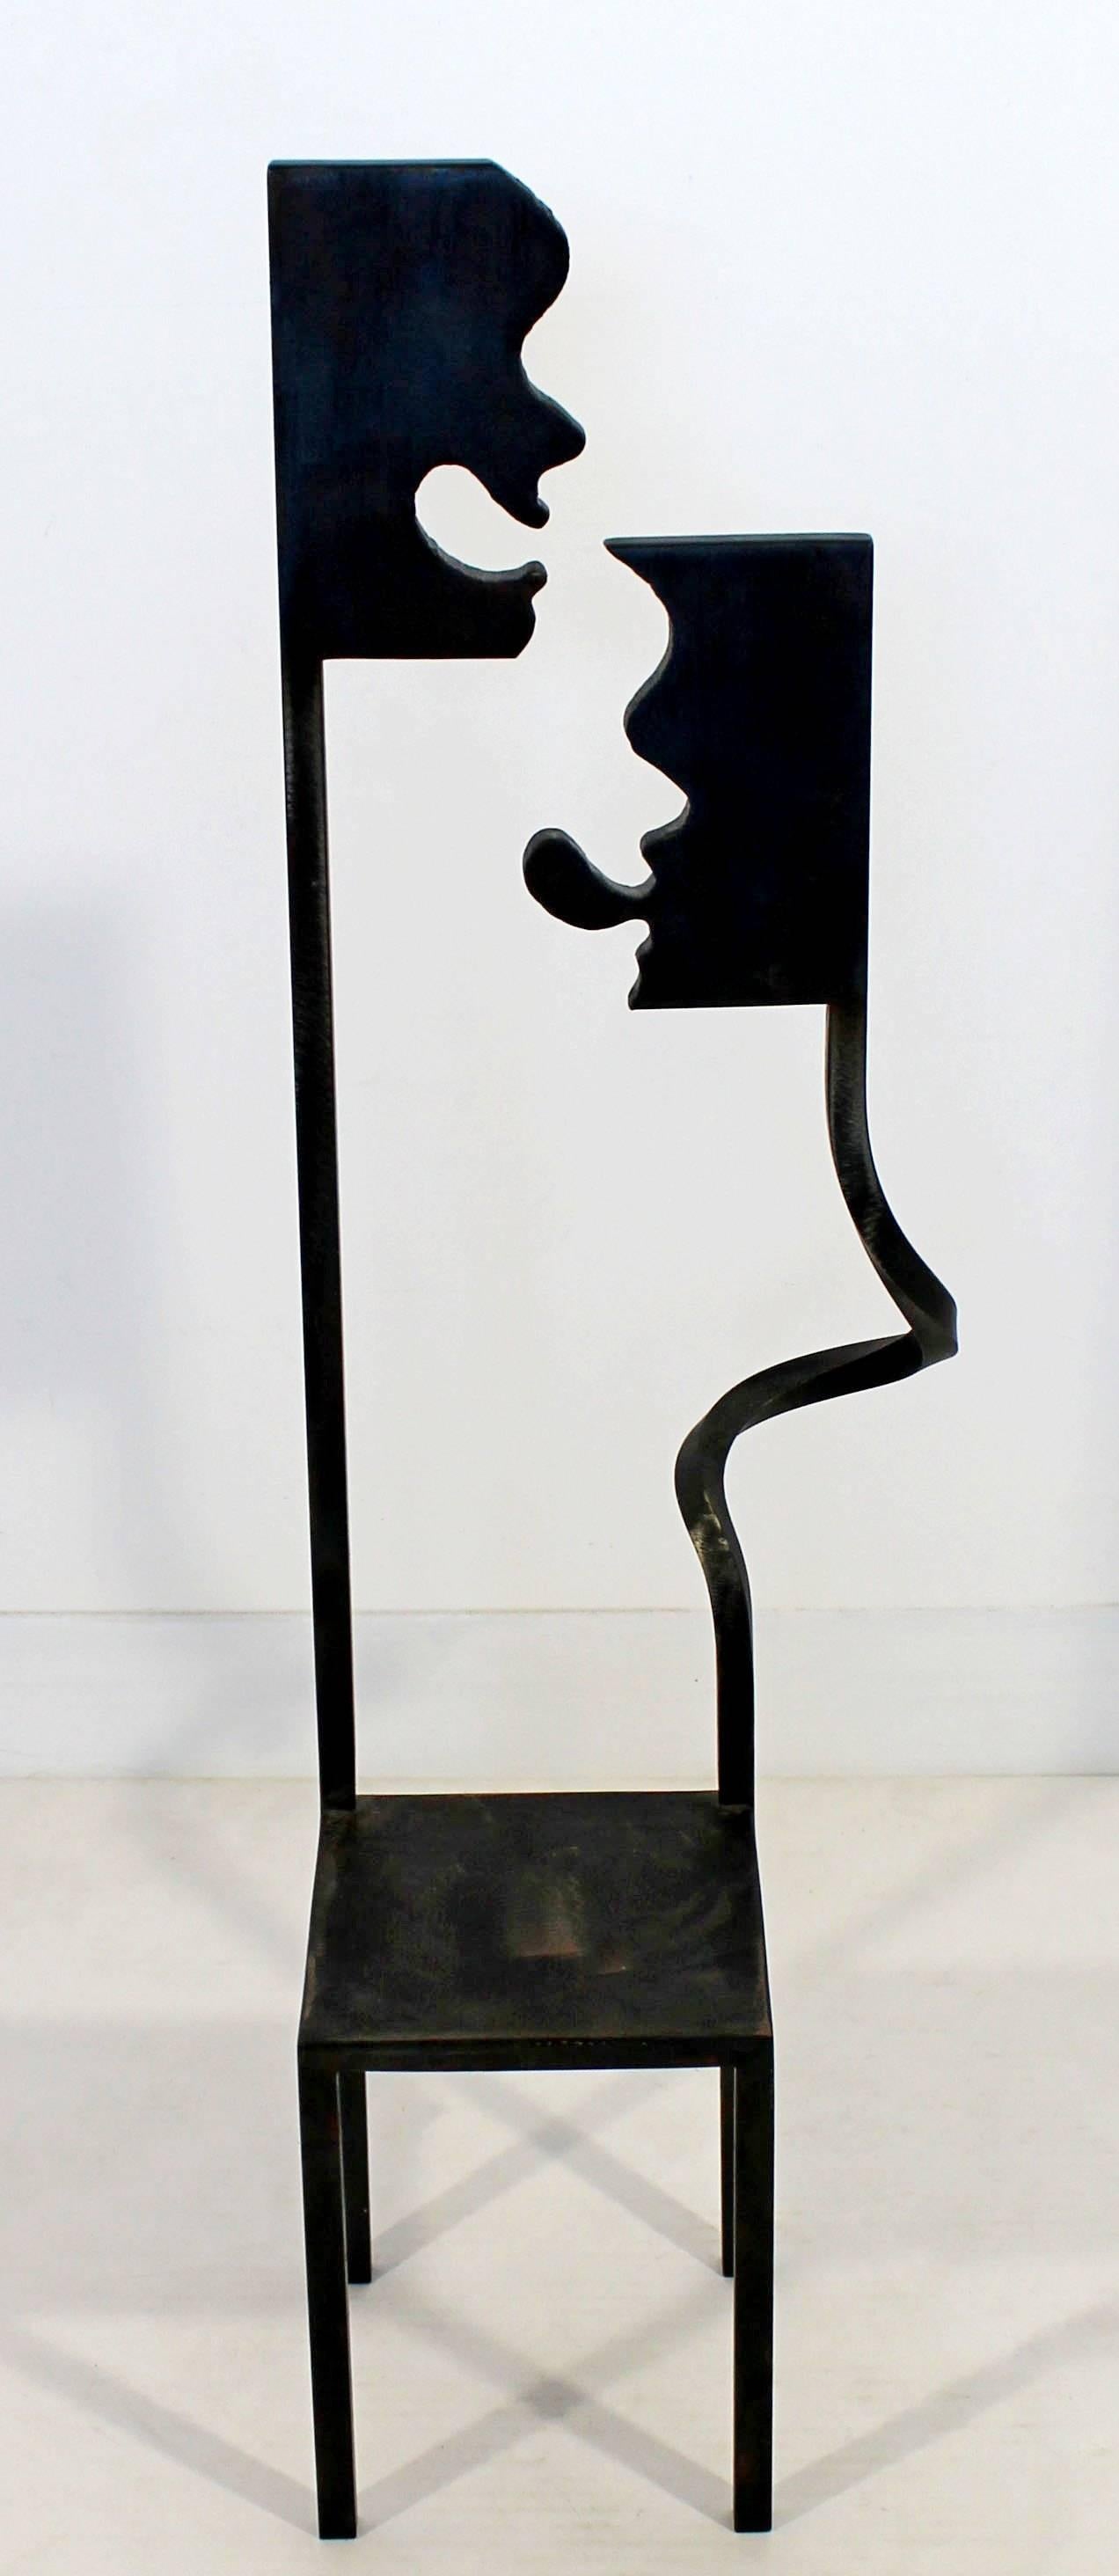 For your consideration is a whimsical, metal, floor sculpture of an artistic chair, signed and dated on the bottom by Gary Kulak, 1997. In excellent condition. The dimensions are 9